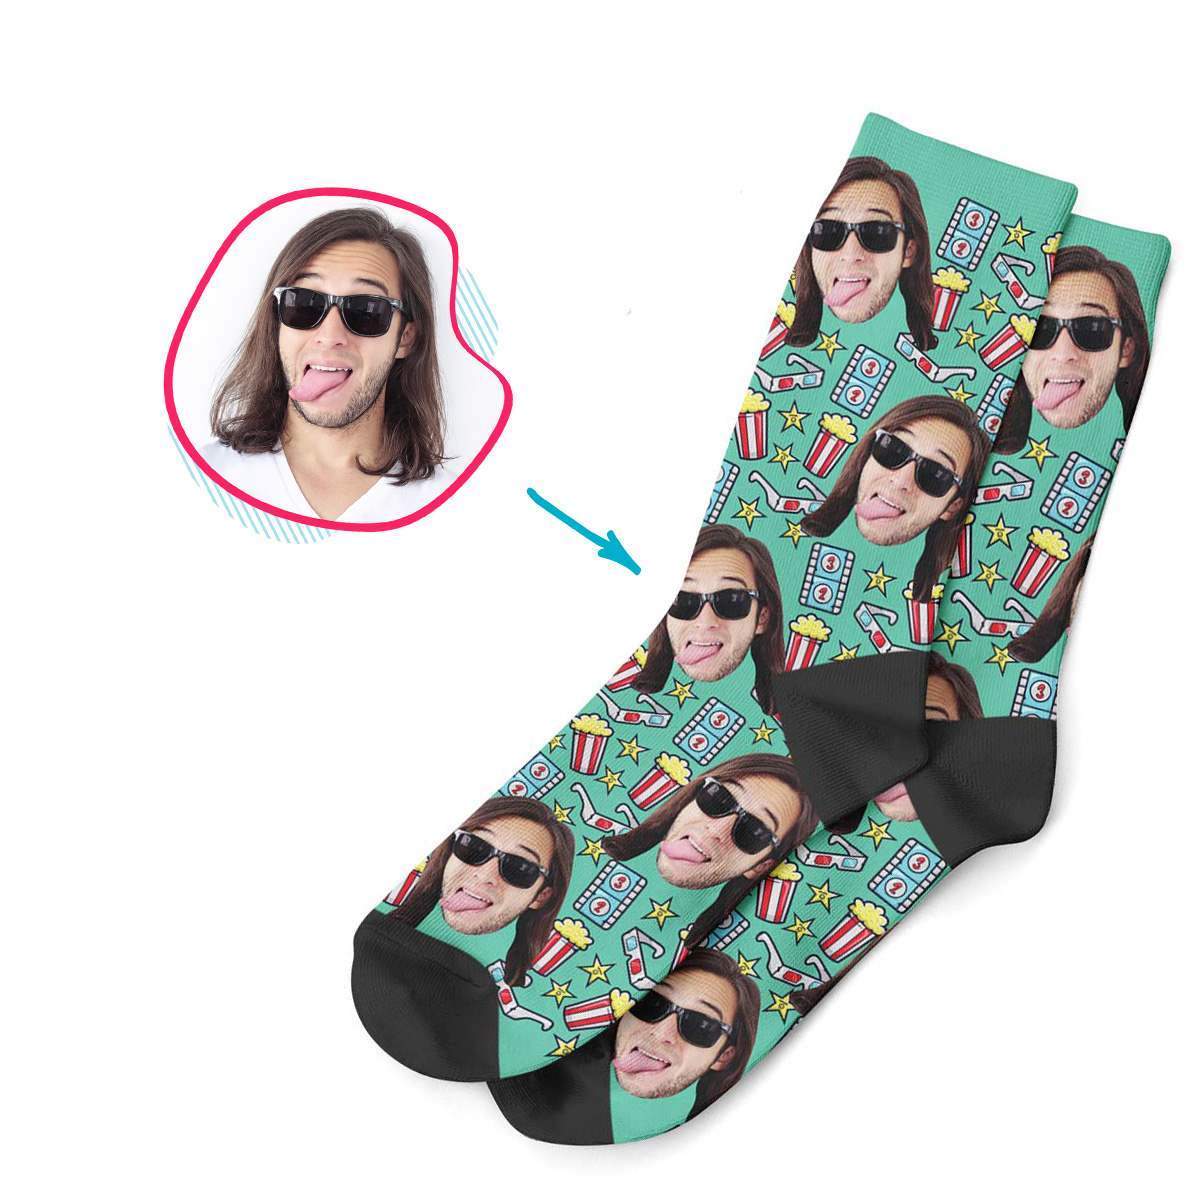 mint Movie socks personalized with photo of face printed on them